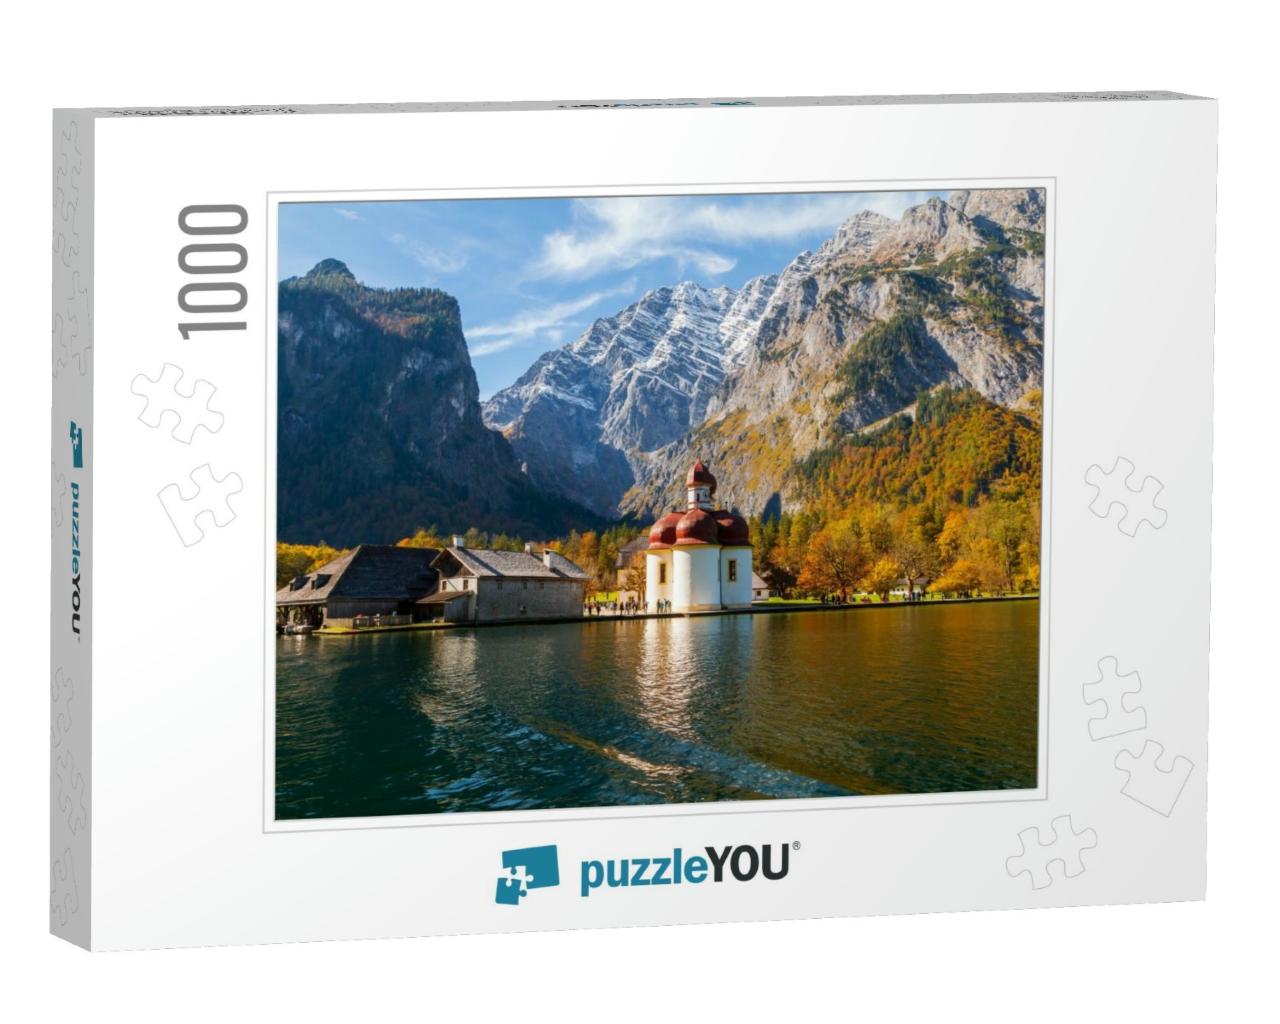 Konigssee Lake Konigsee in Foggy Weather, St. Bartholoma... Jigsaw Puzzle with 1000 pieces